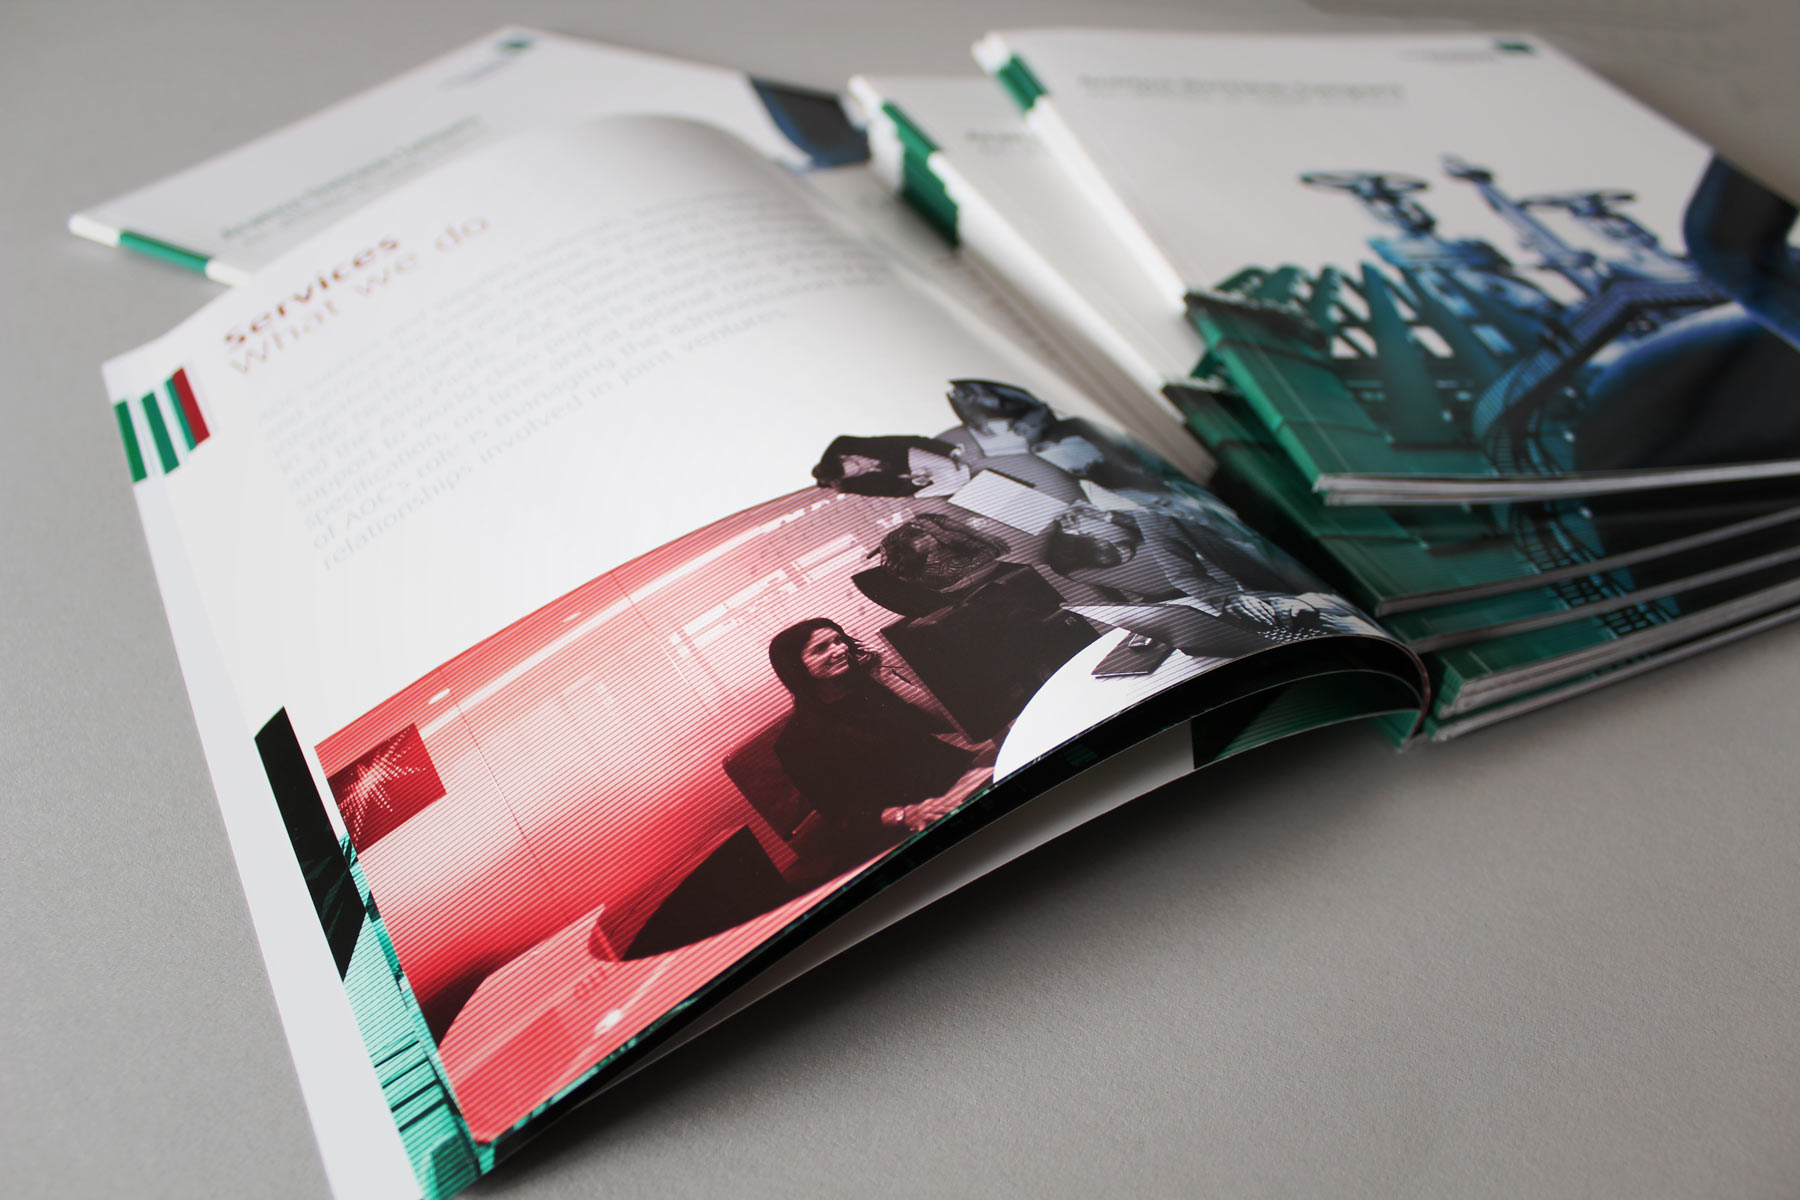 The final 48 page publication blends a cohesive corporate communication with a striking supporting image suite.